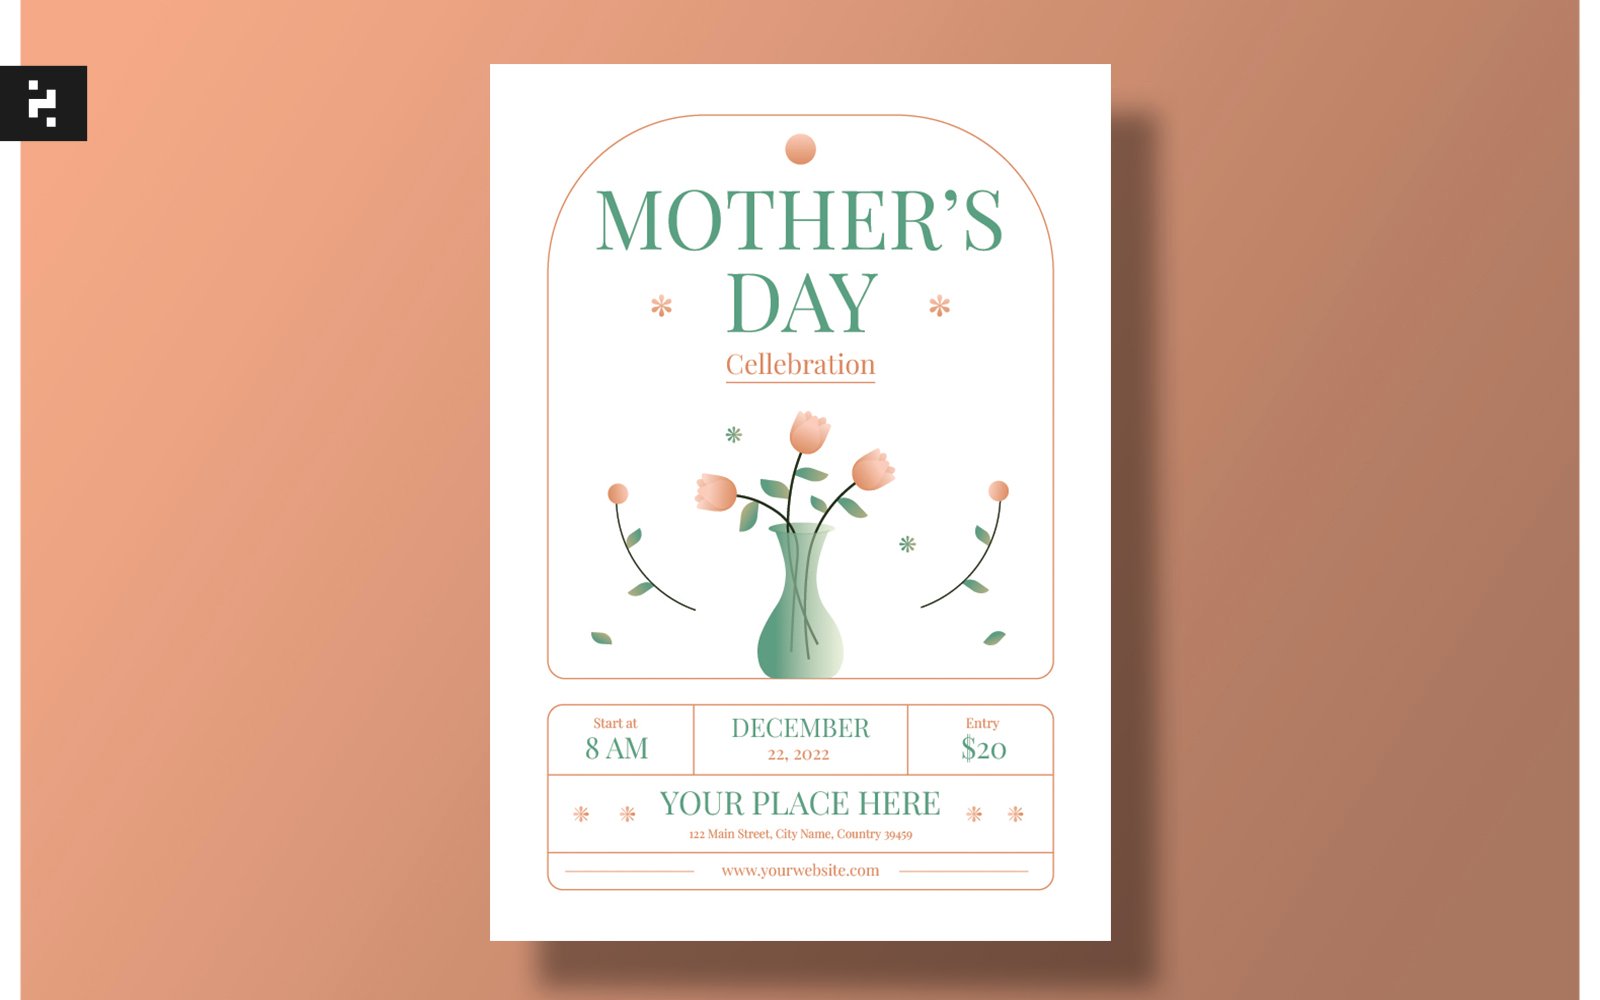 Aesthetic Mother's Day Flyer Template